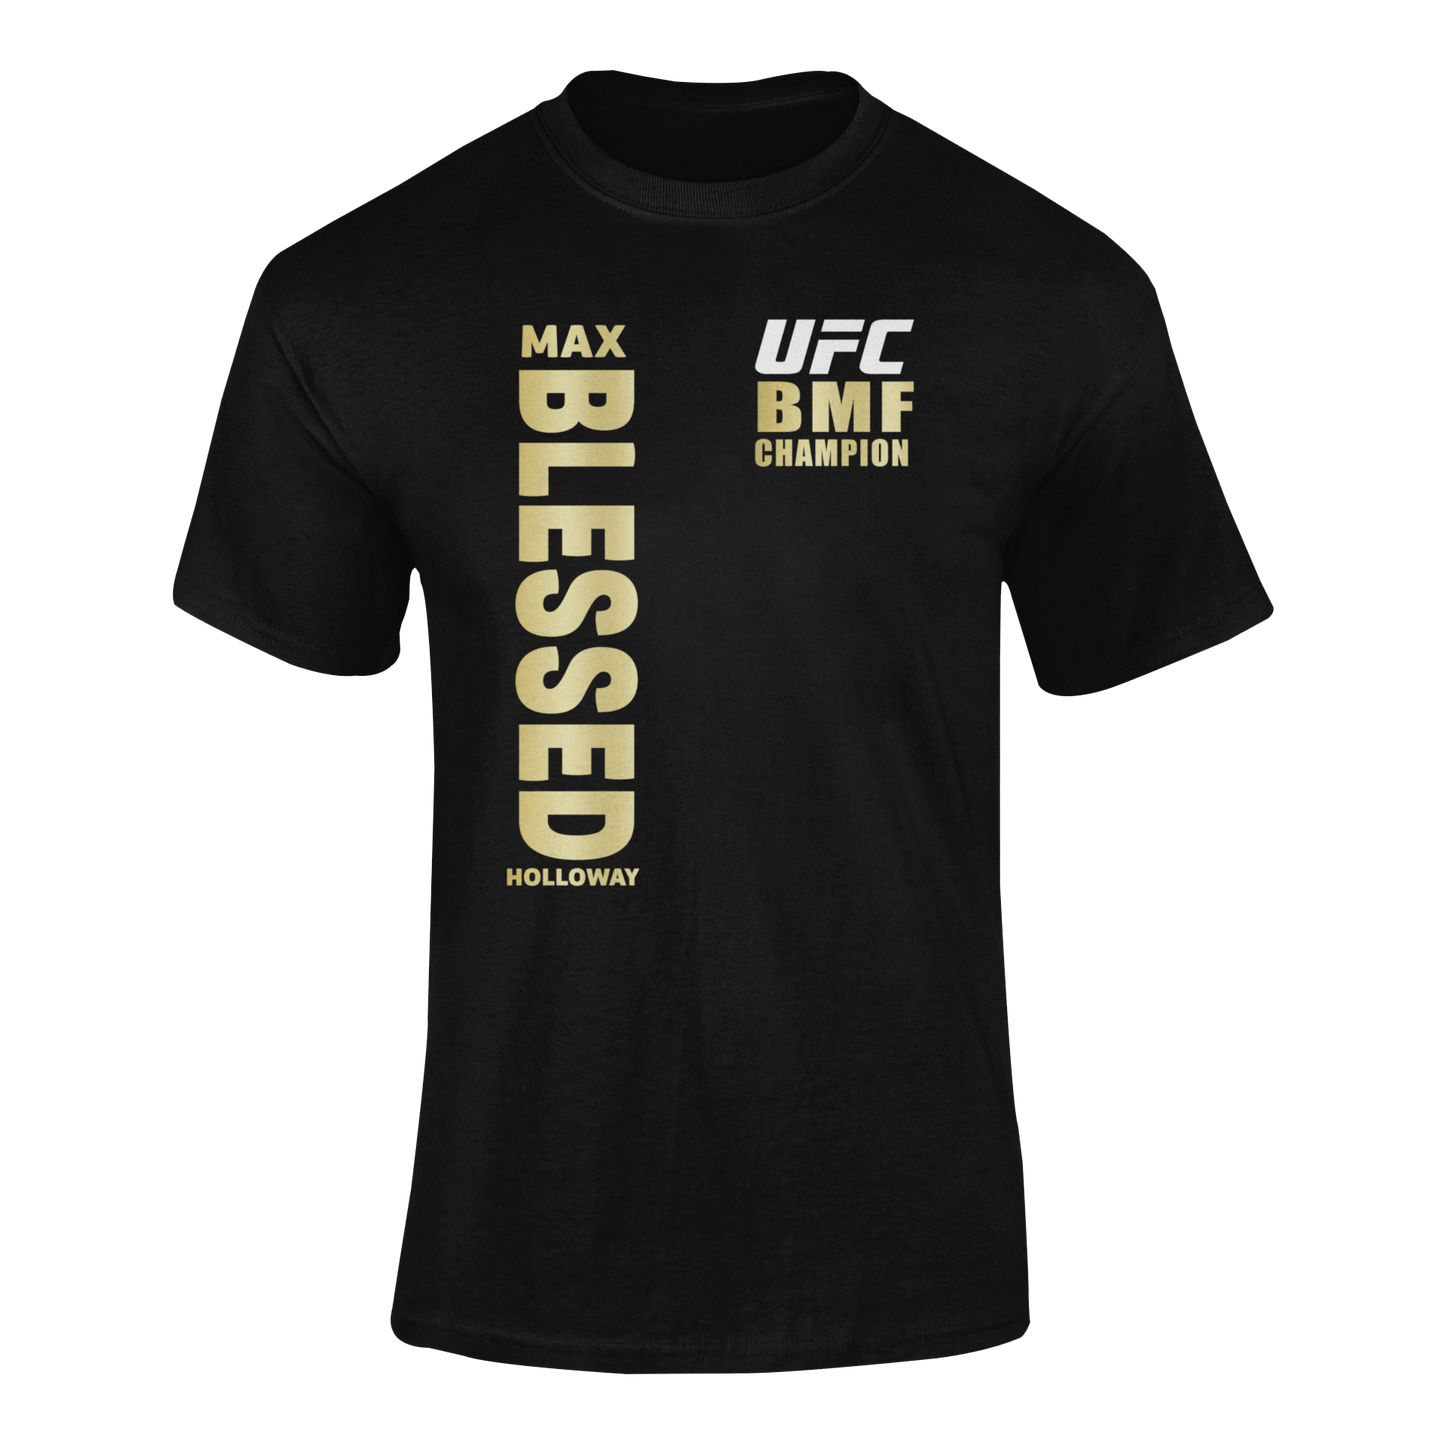 Max "Blessed" Holloway UFC BMF Gold Champ fan t shirt